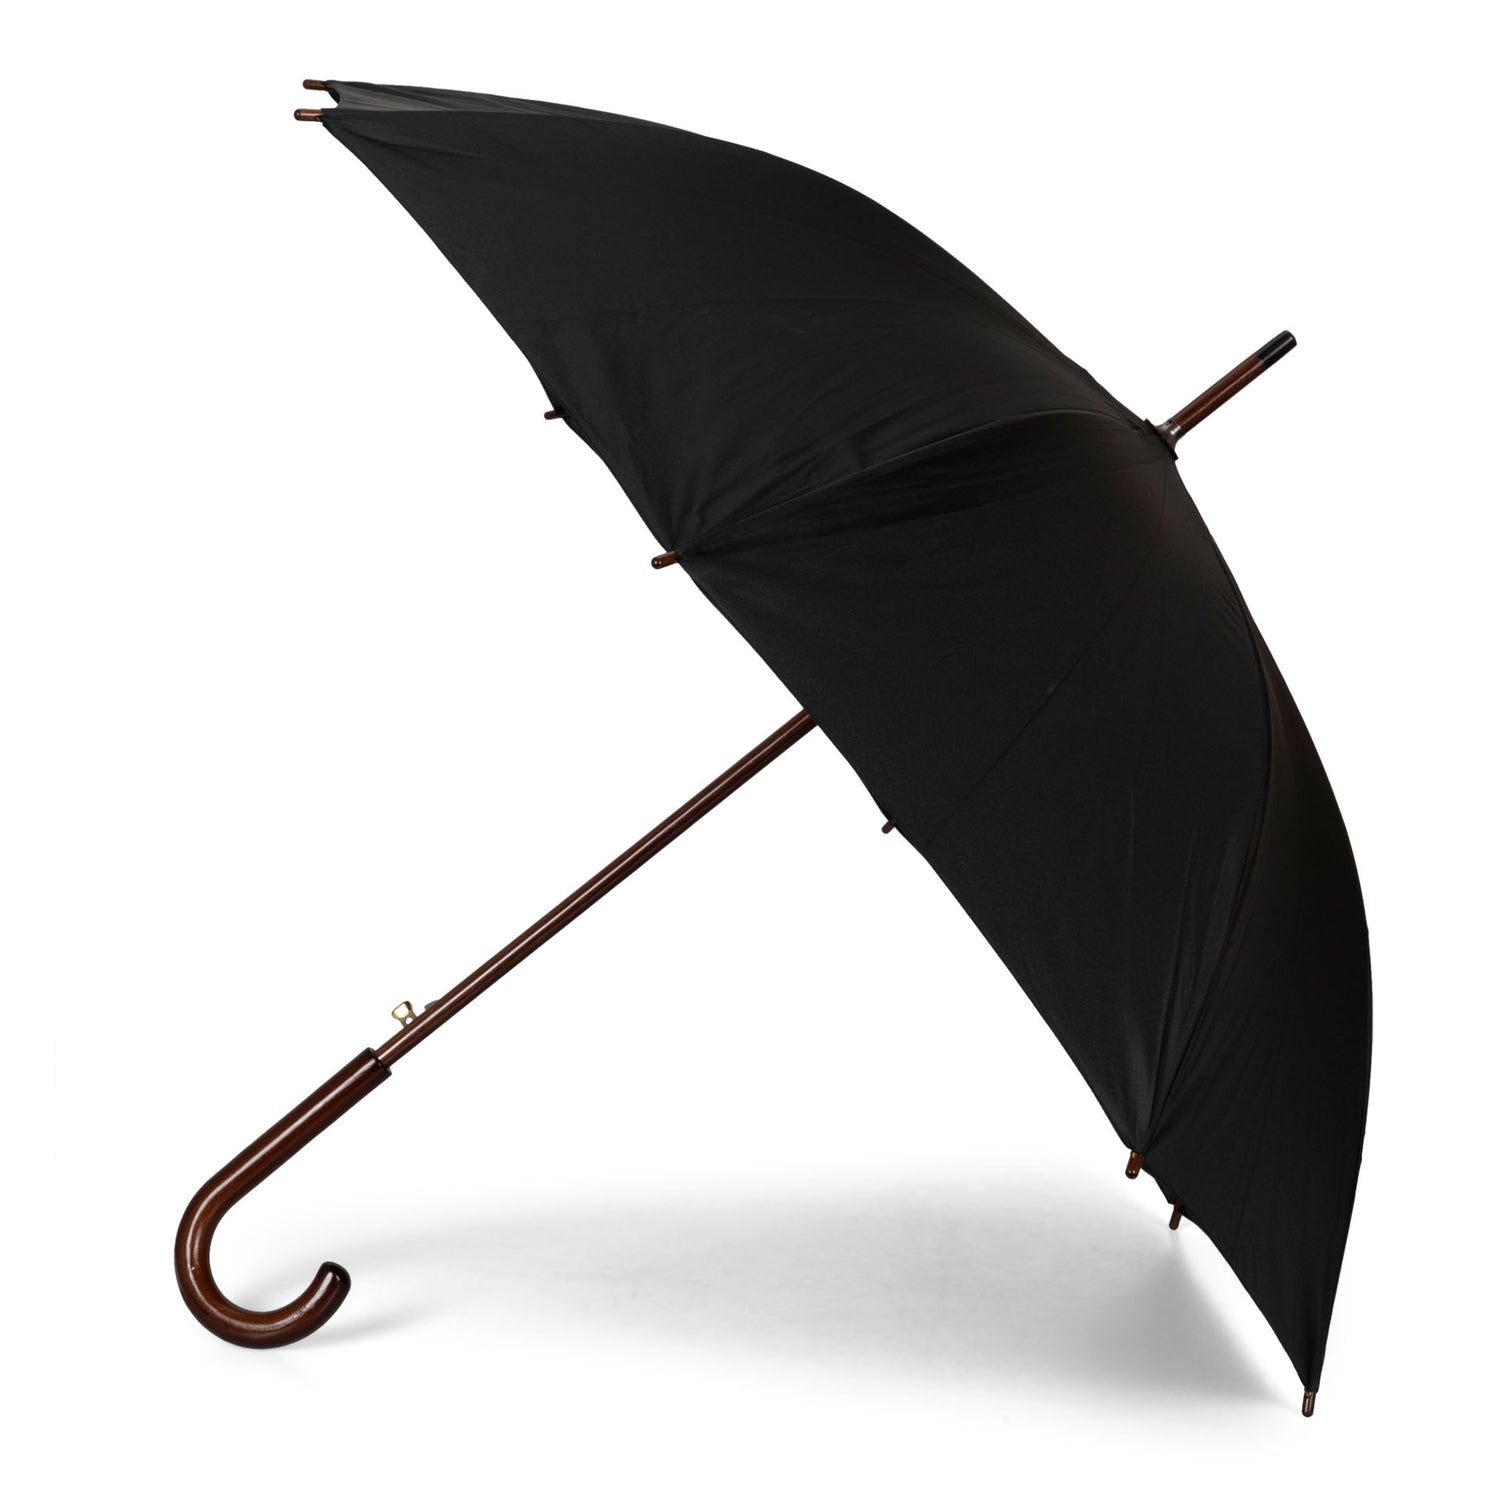 Side view of a unisex black umbrella called Long Auto Open from Tracker that's leaned on the opened top part, showcasing its dark-birch-coloured handle.